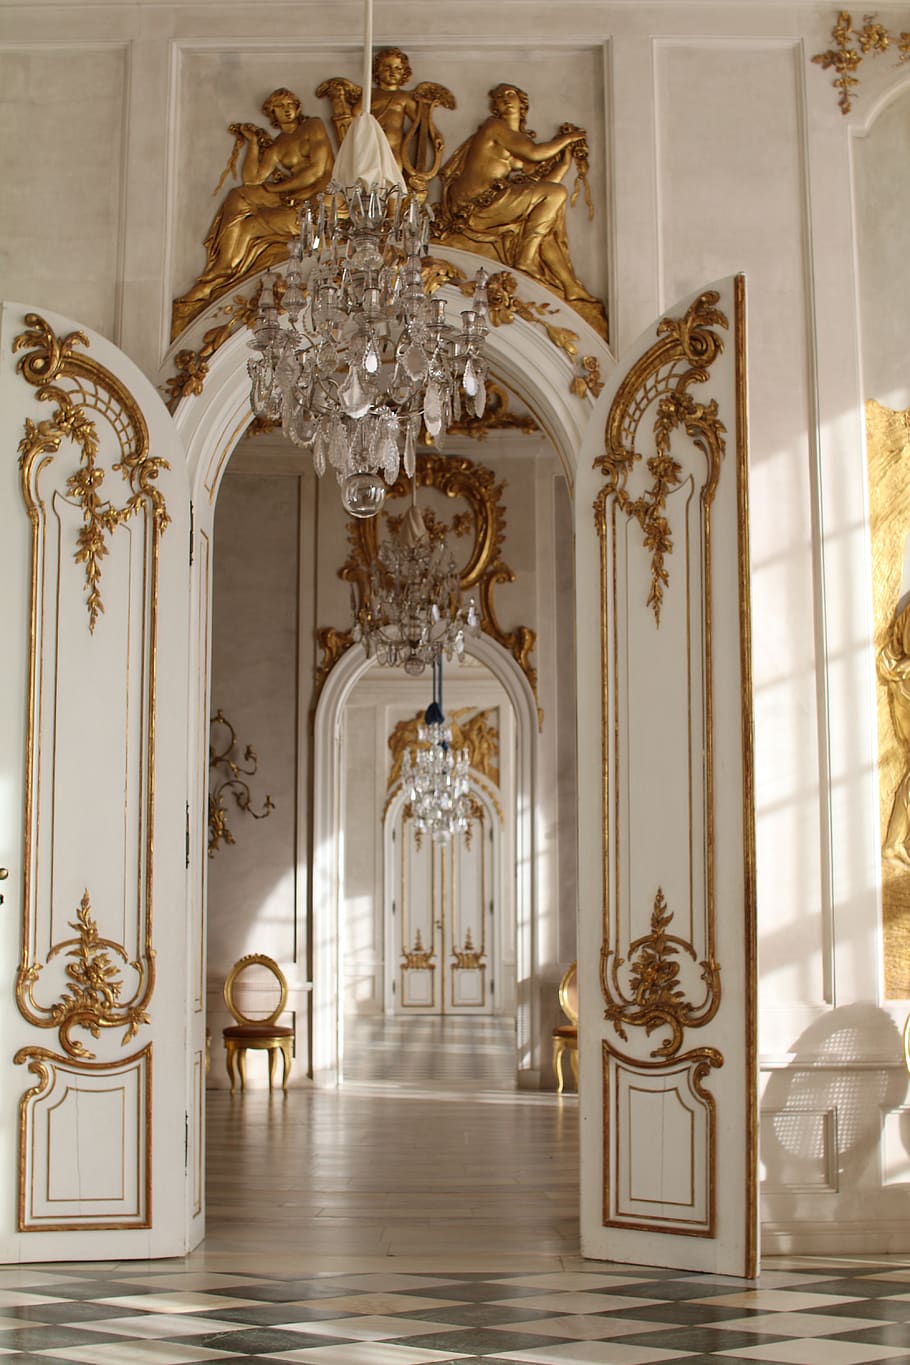 potsdam, berlin, hall of mirrors, sanssouci, see, places of interest, indoors, architecture, chandelier, built structure